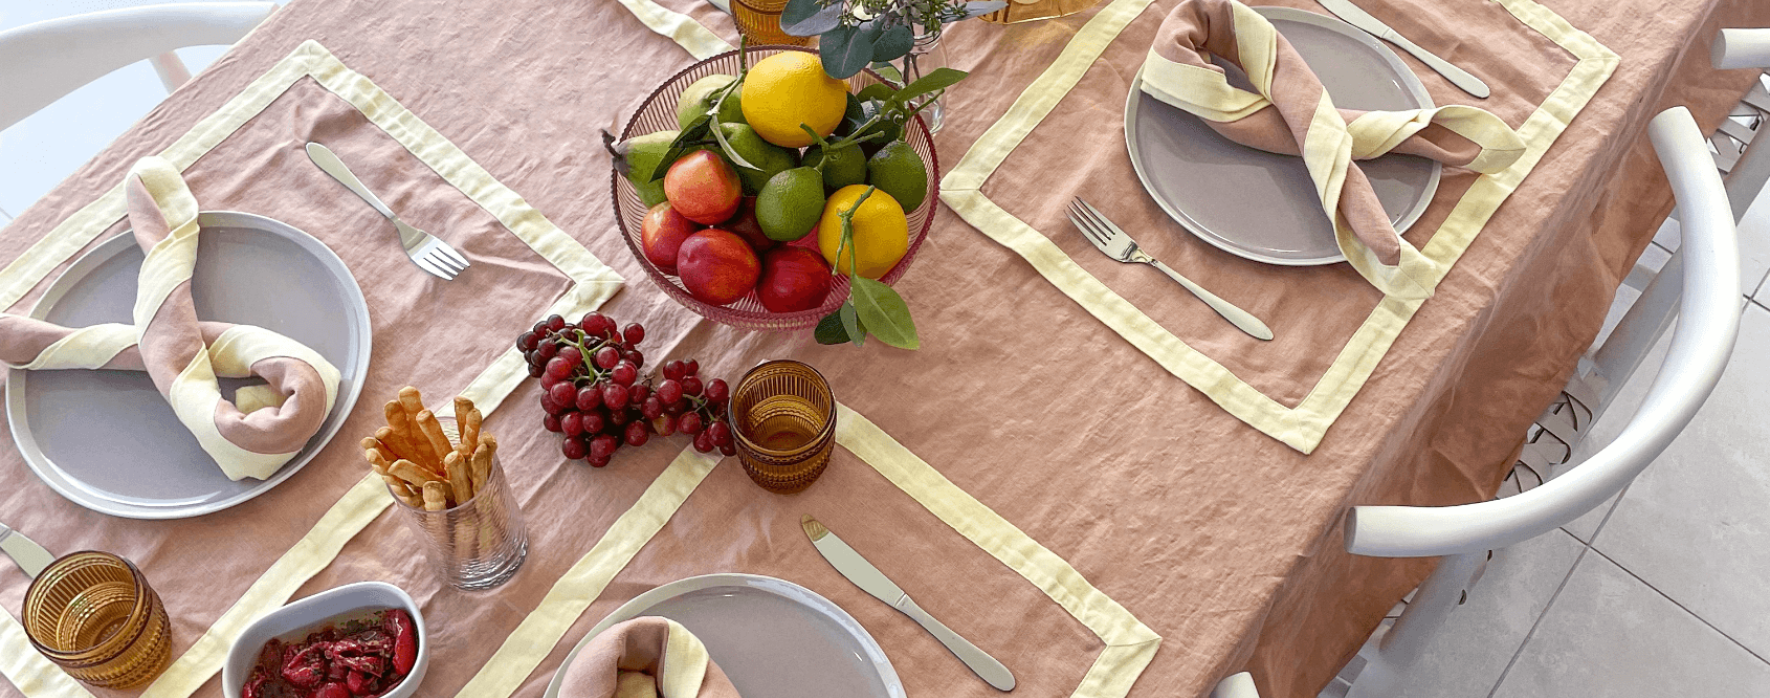 a-global-mediterranean-tablescape-1690x672.png 